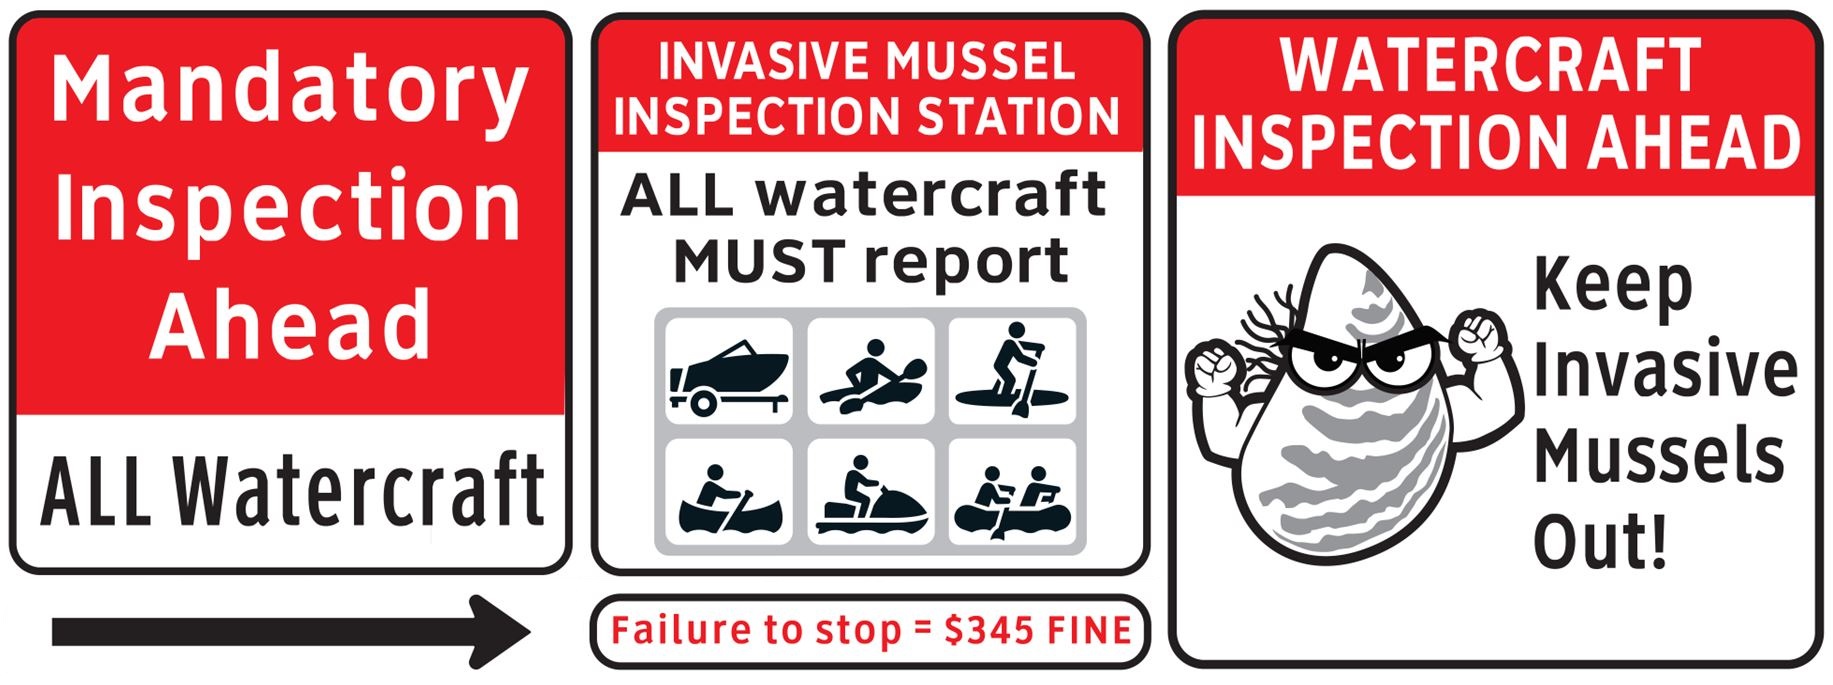 Help keep invasive mussels out